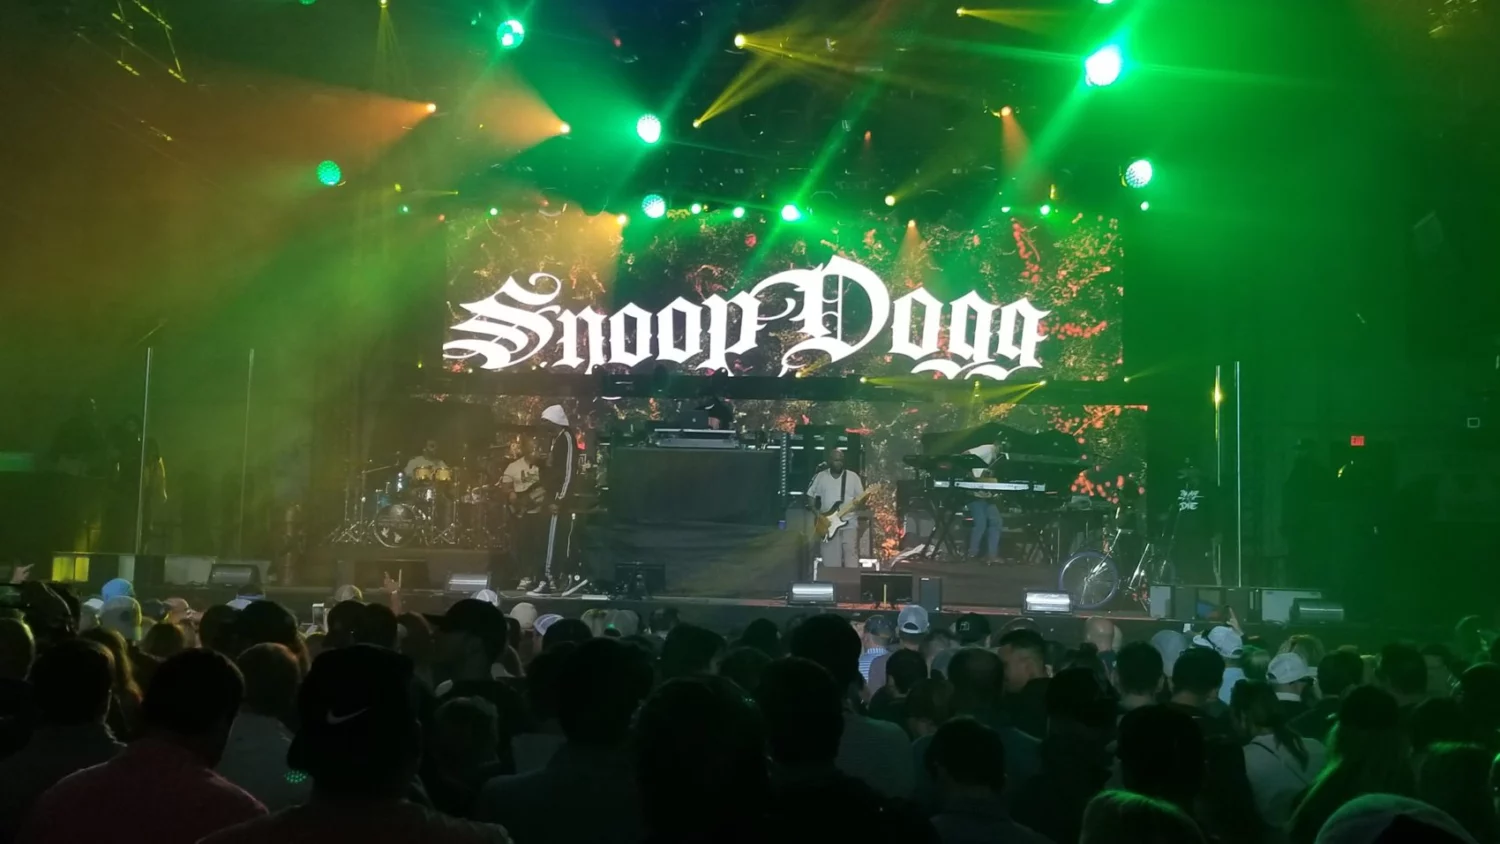 Image of LED display at Snoop Dogg Performance